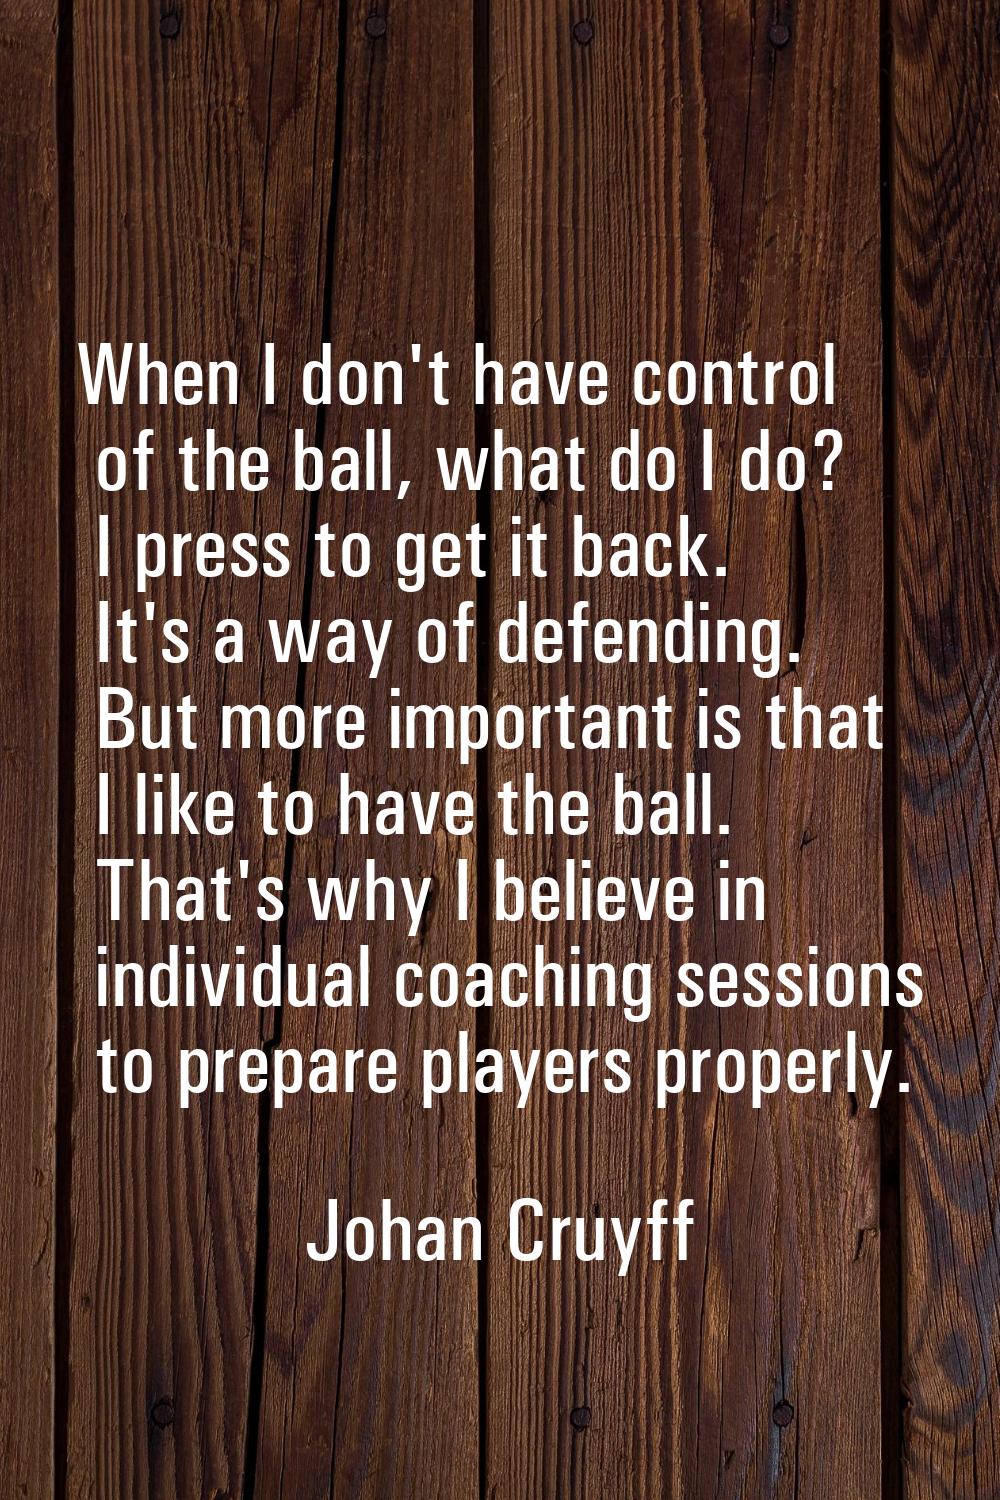 When I don't have control of the ball, what do I do? I press to get it back. It's a way of defendin